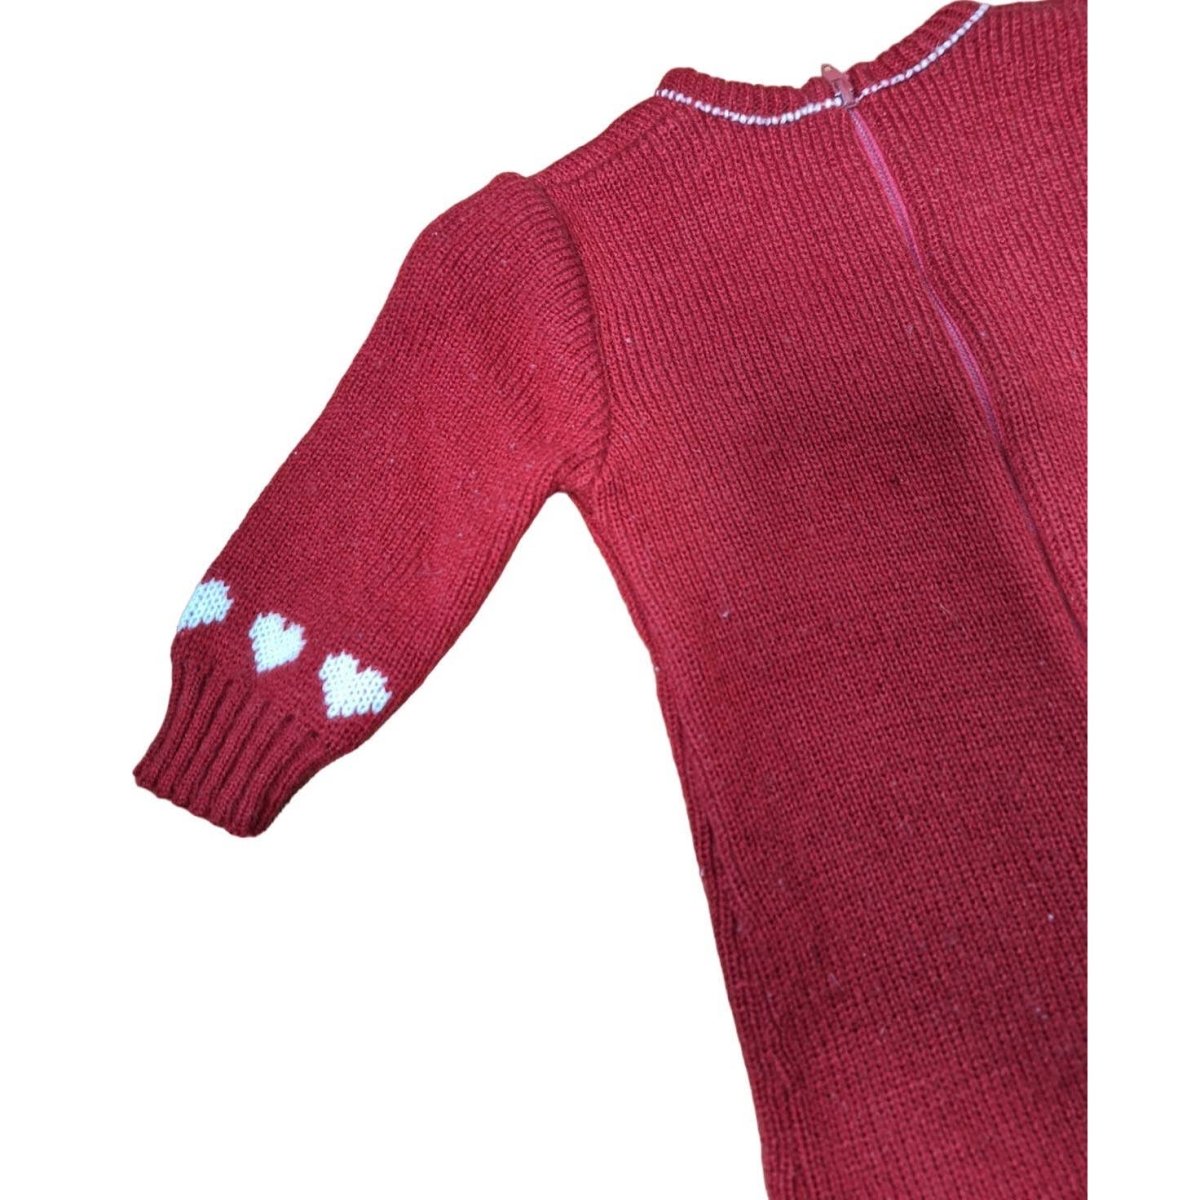 Vintage 80s Red Heart Sweater Onsie With Vest Size 6 Months - themallvintage The Mall Vintage